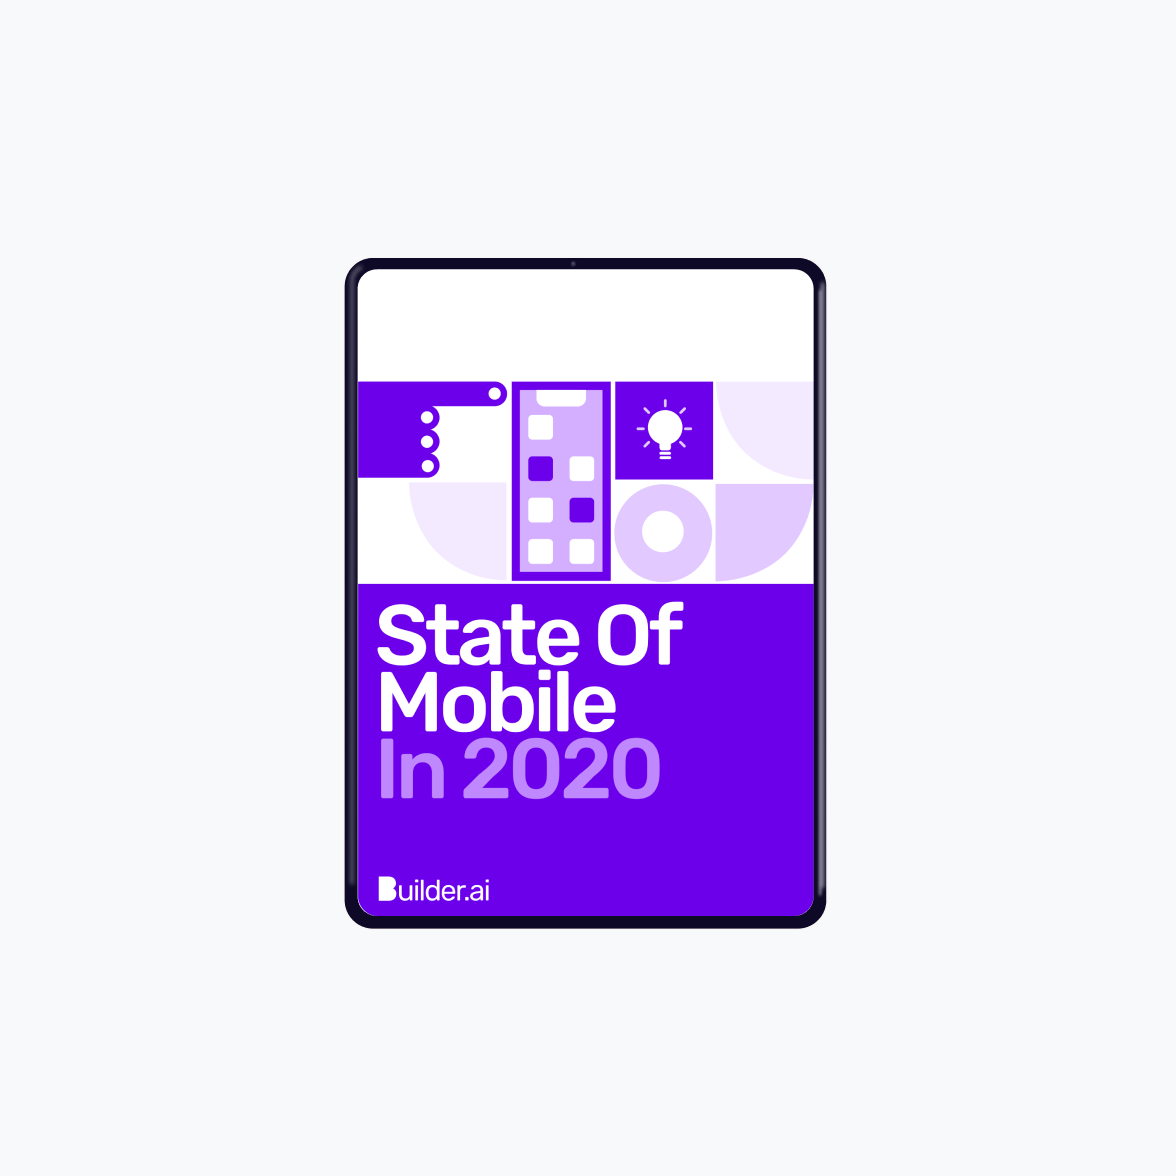 The state of mobile in 2020